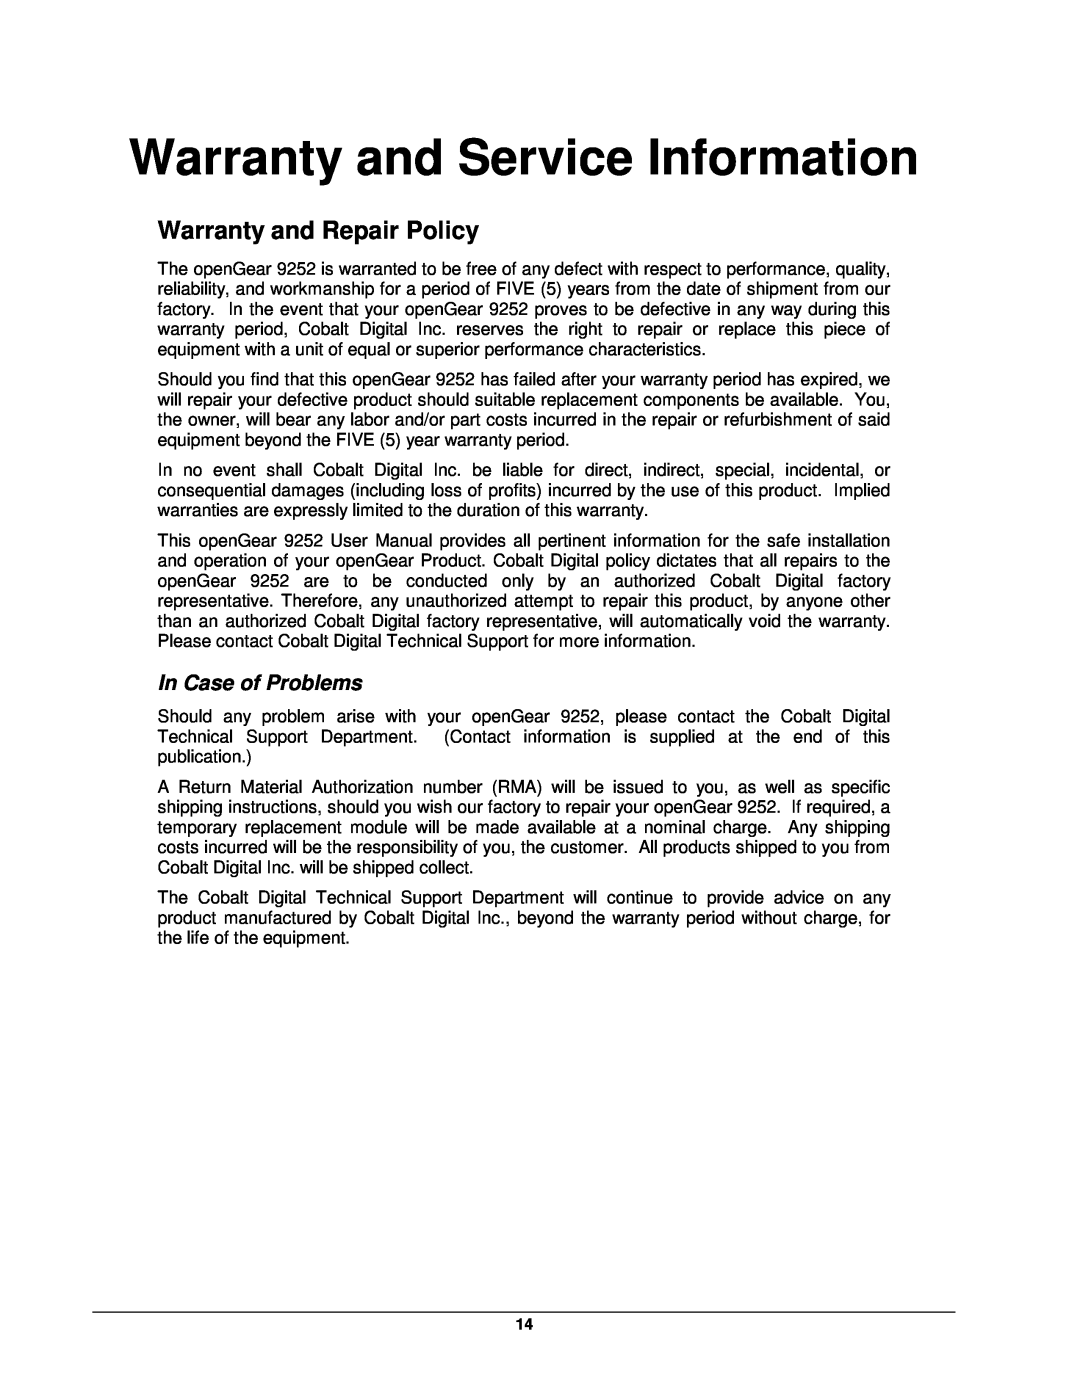 Cobalt Networks 9252 user manual Warranty and Service Information, Warranty and Repair Policy, In Case of Problems 